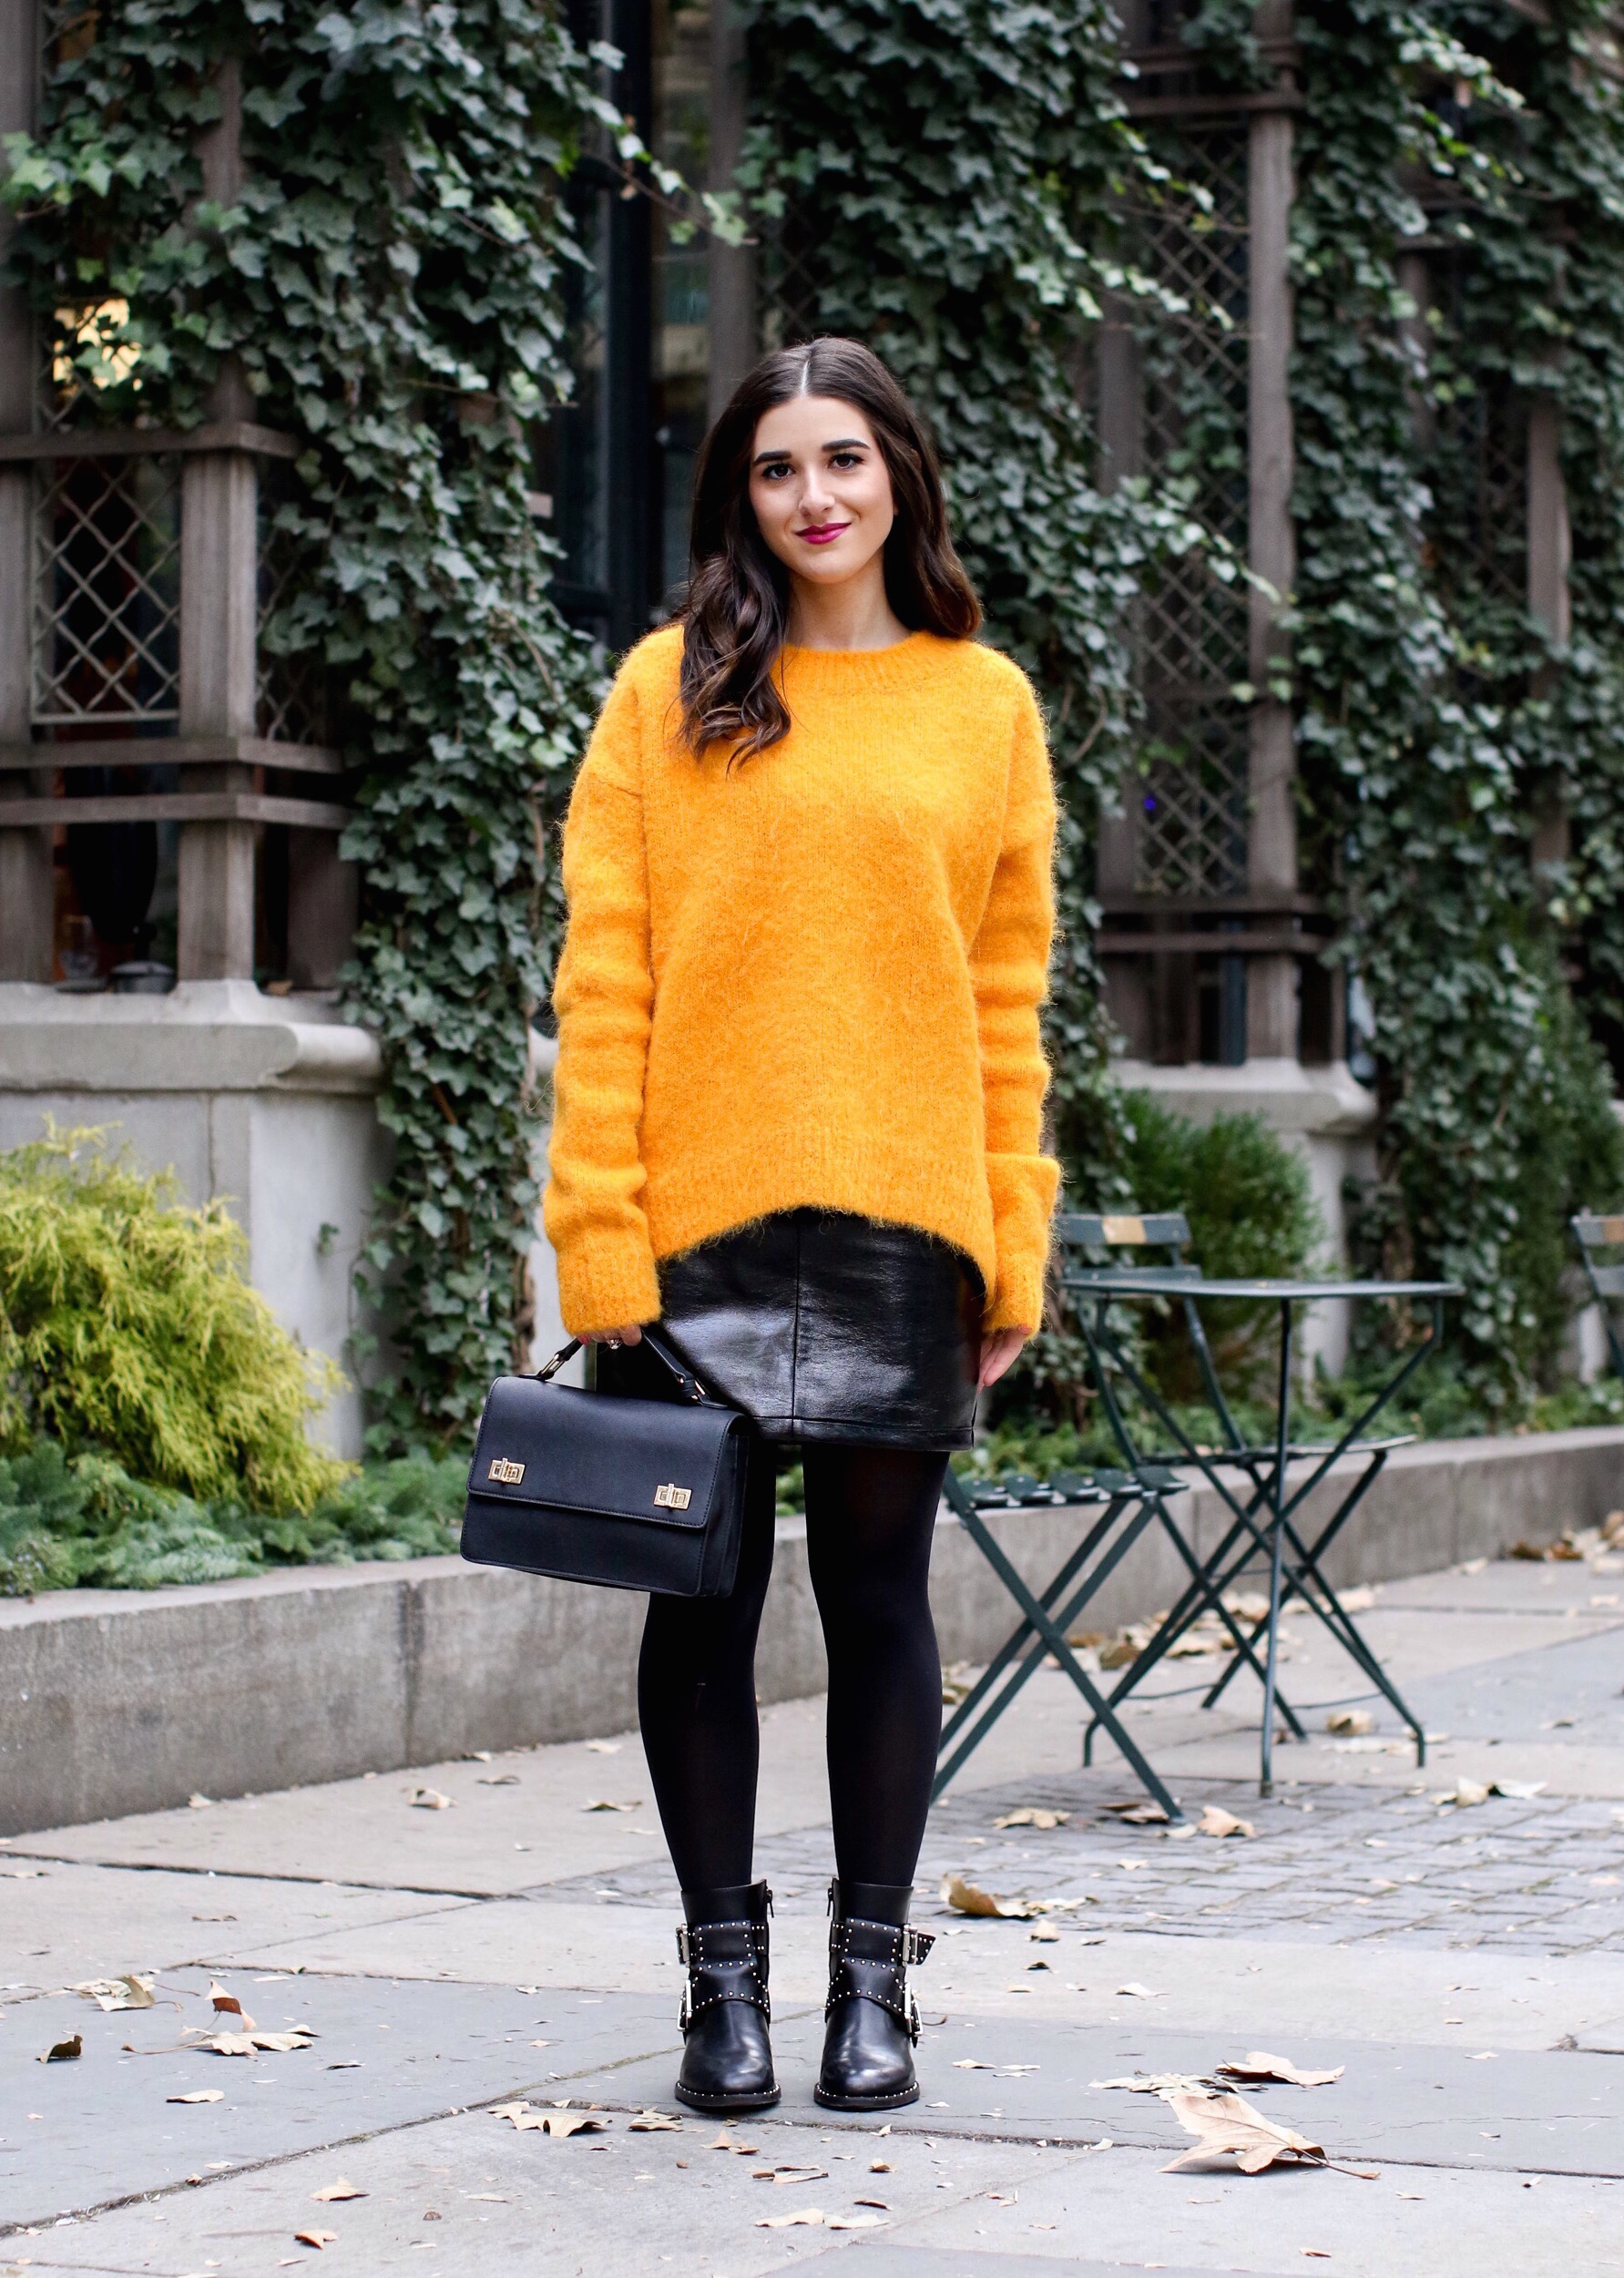 Yellow Sweater Pleather Skirt Why You Should Think Before You Unfollow Esther Santer Fashion Blog NYC Street Style Blogger Outfit OOTD Trendy Cozy Winter Look Girl Women Oversized Top New York City Instagram Tips DSW Studded Boots  H&M Topshop Details.jpg